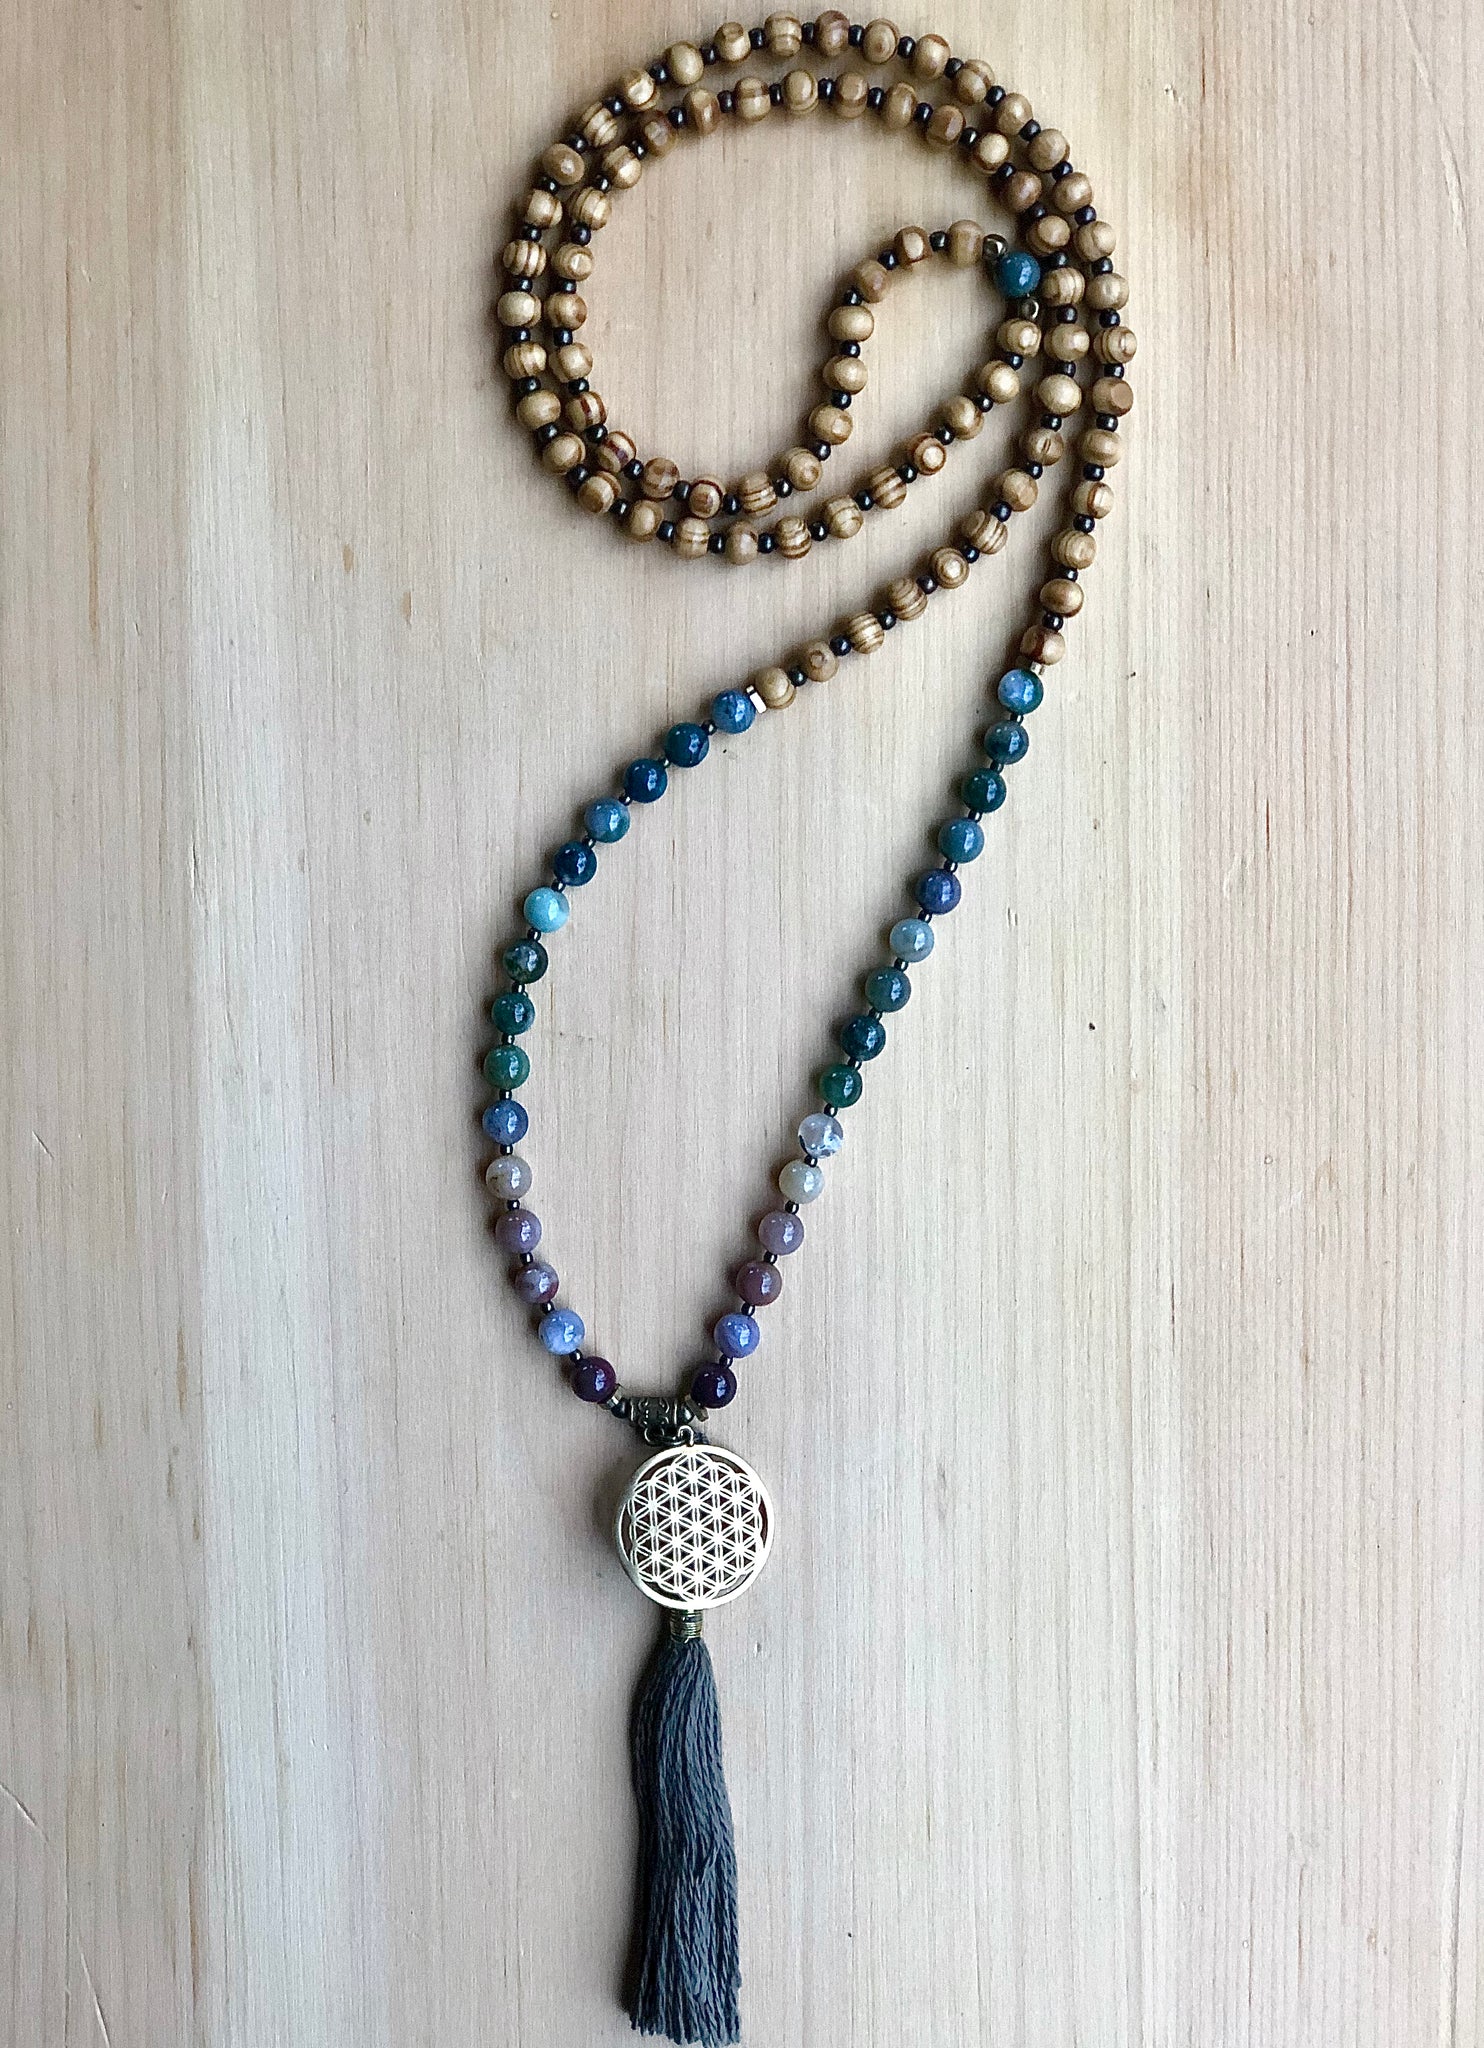 Indian Agate Flower of Life Mala Necklace